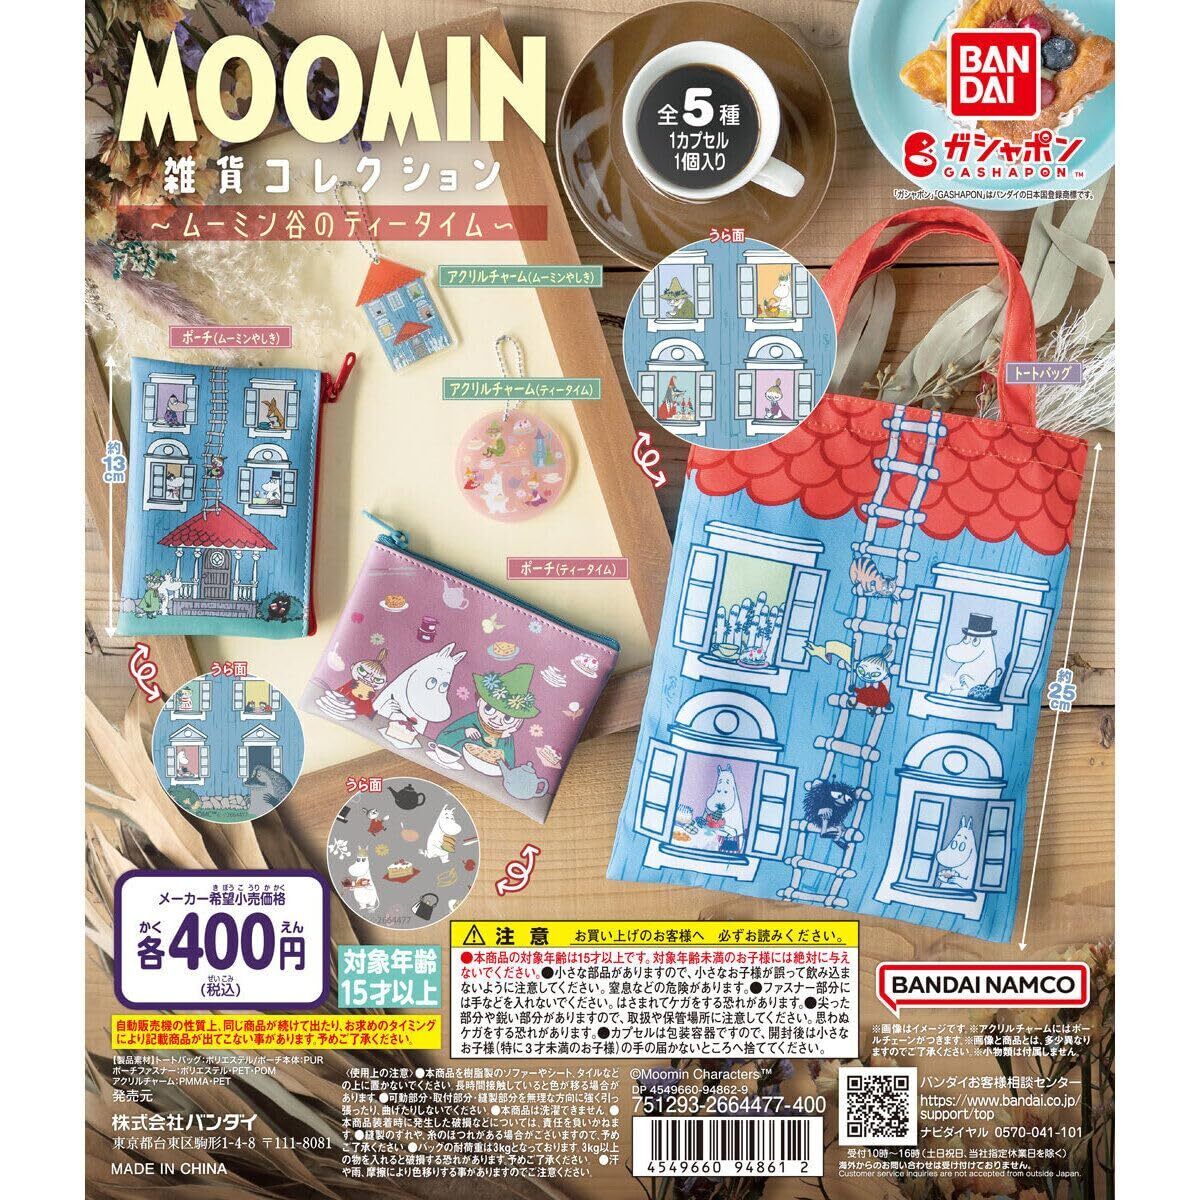 MOOMIN Moomin Miscellaneous Collection Moomin Valley Tea Time All 5 kinds of Ful